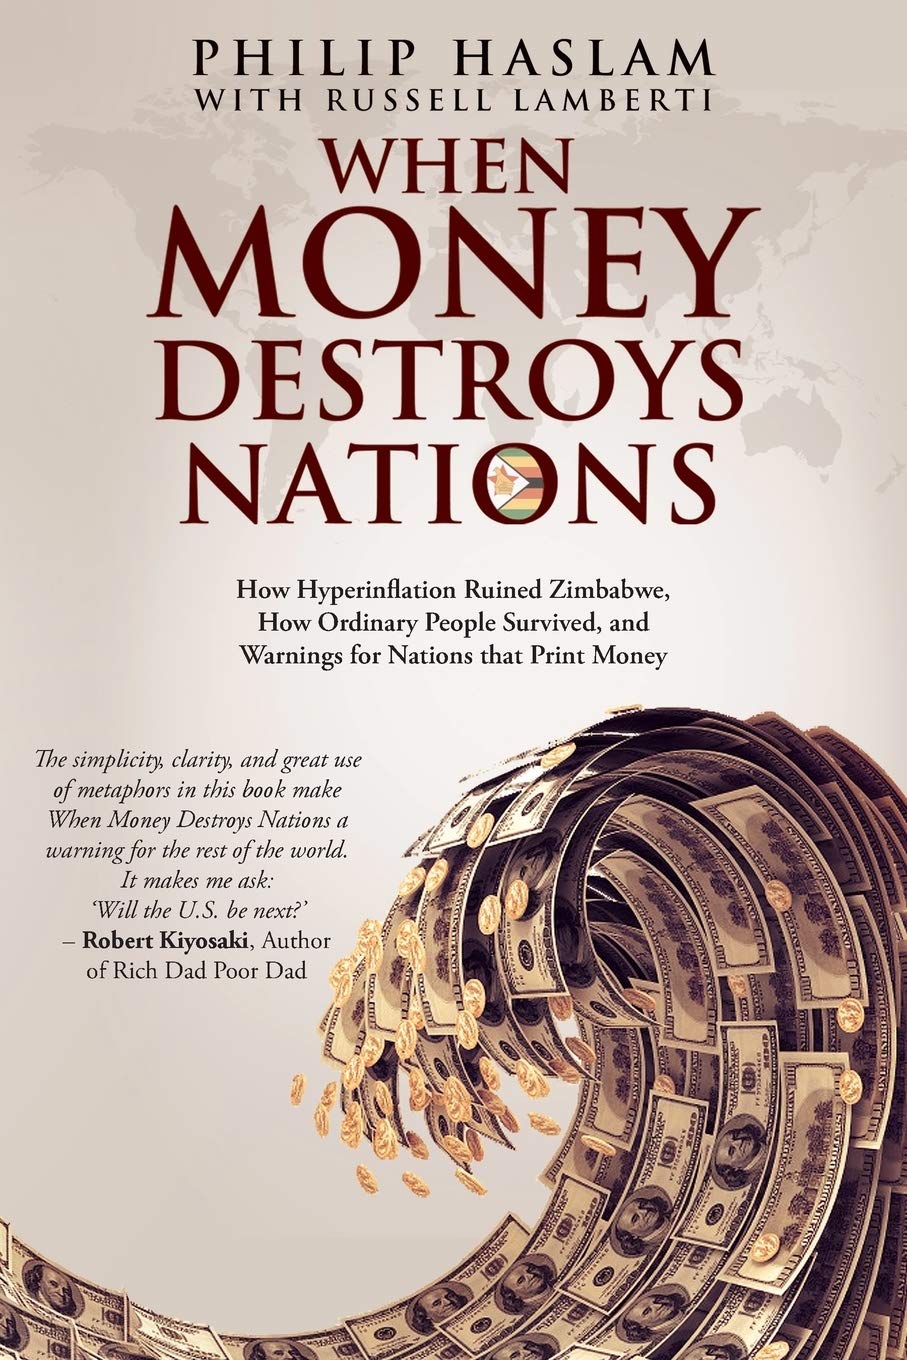 When Money Destroys Nations: How Hyperinflation Ruined Zimbabwe, How Ordinary People Survived, and Warnings for Nations that Print Money - Epub + Converted PDF